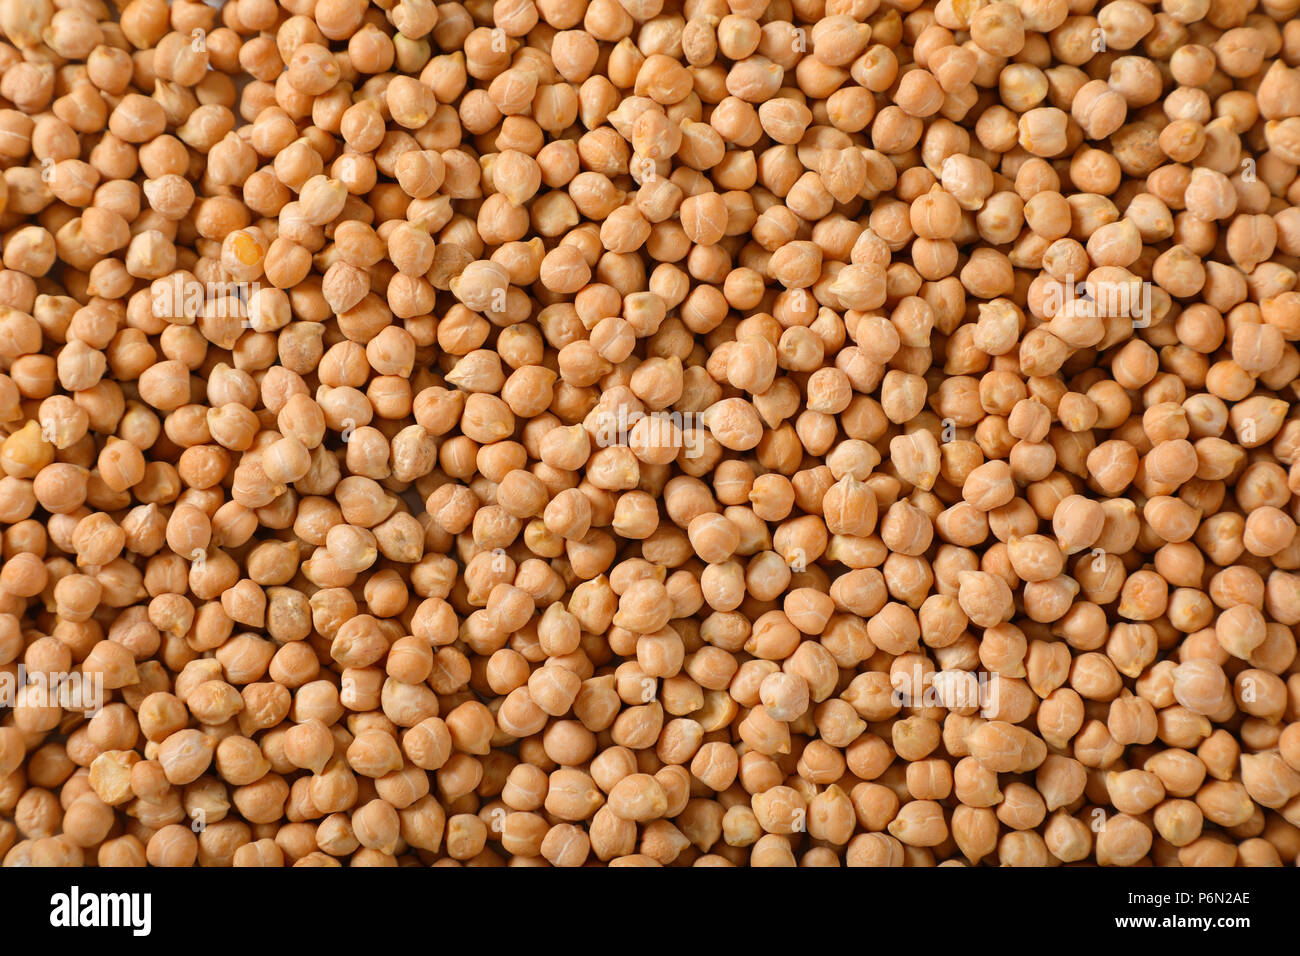 grains of raw chickpeas as a texture background Stock Photo